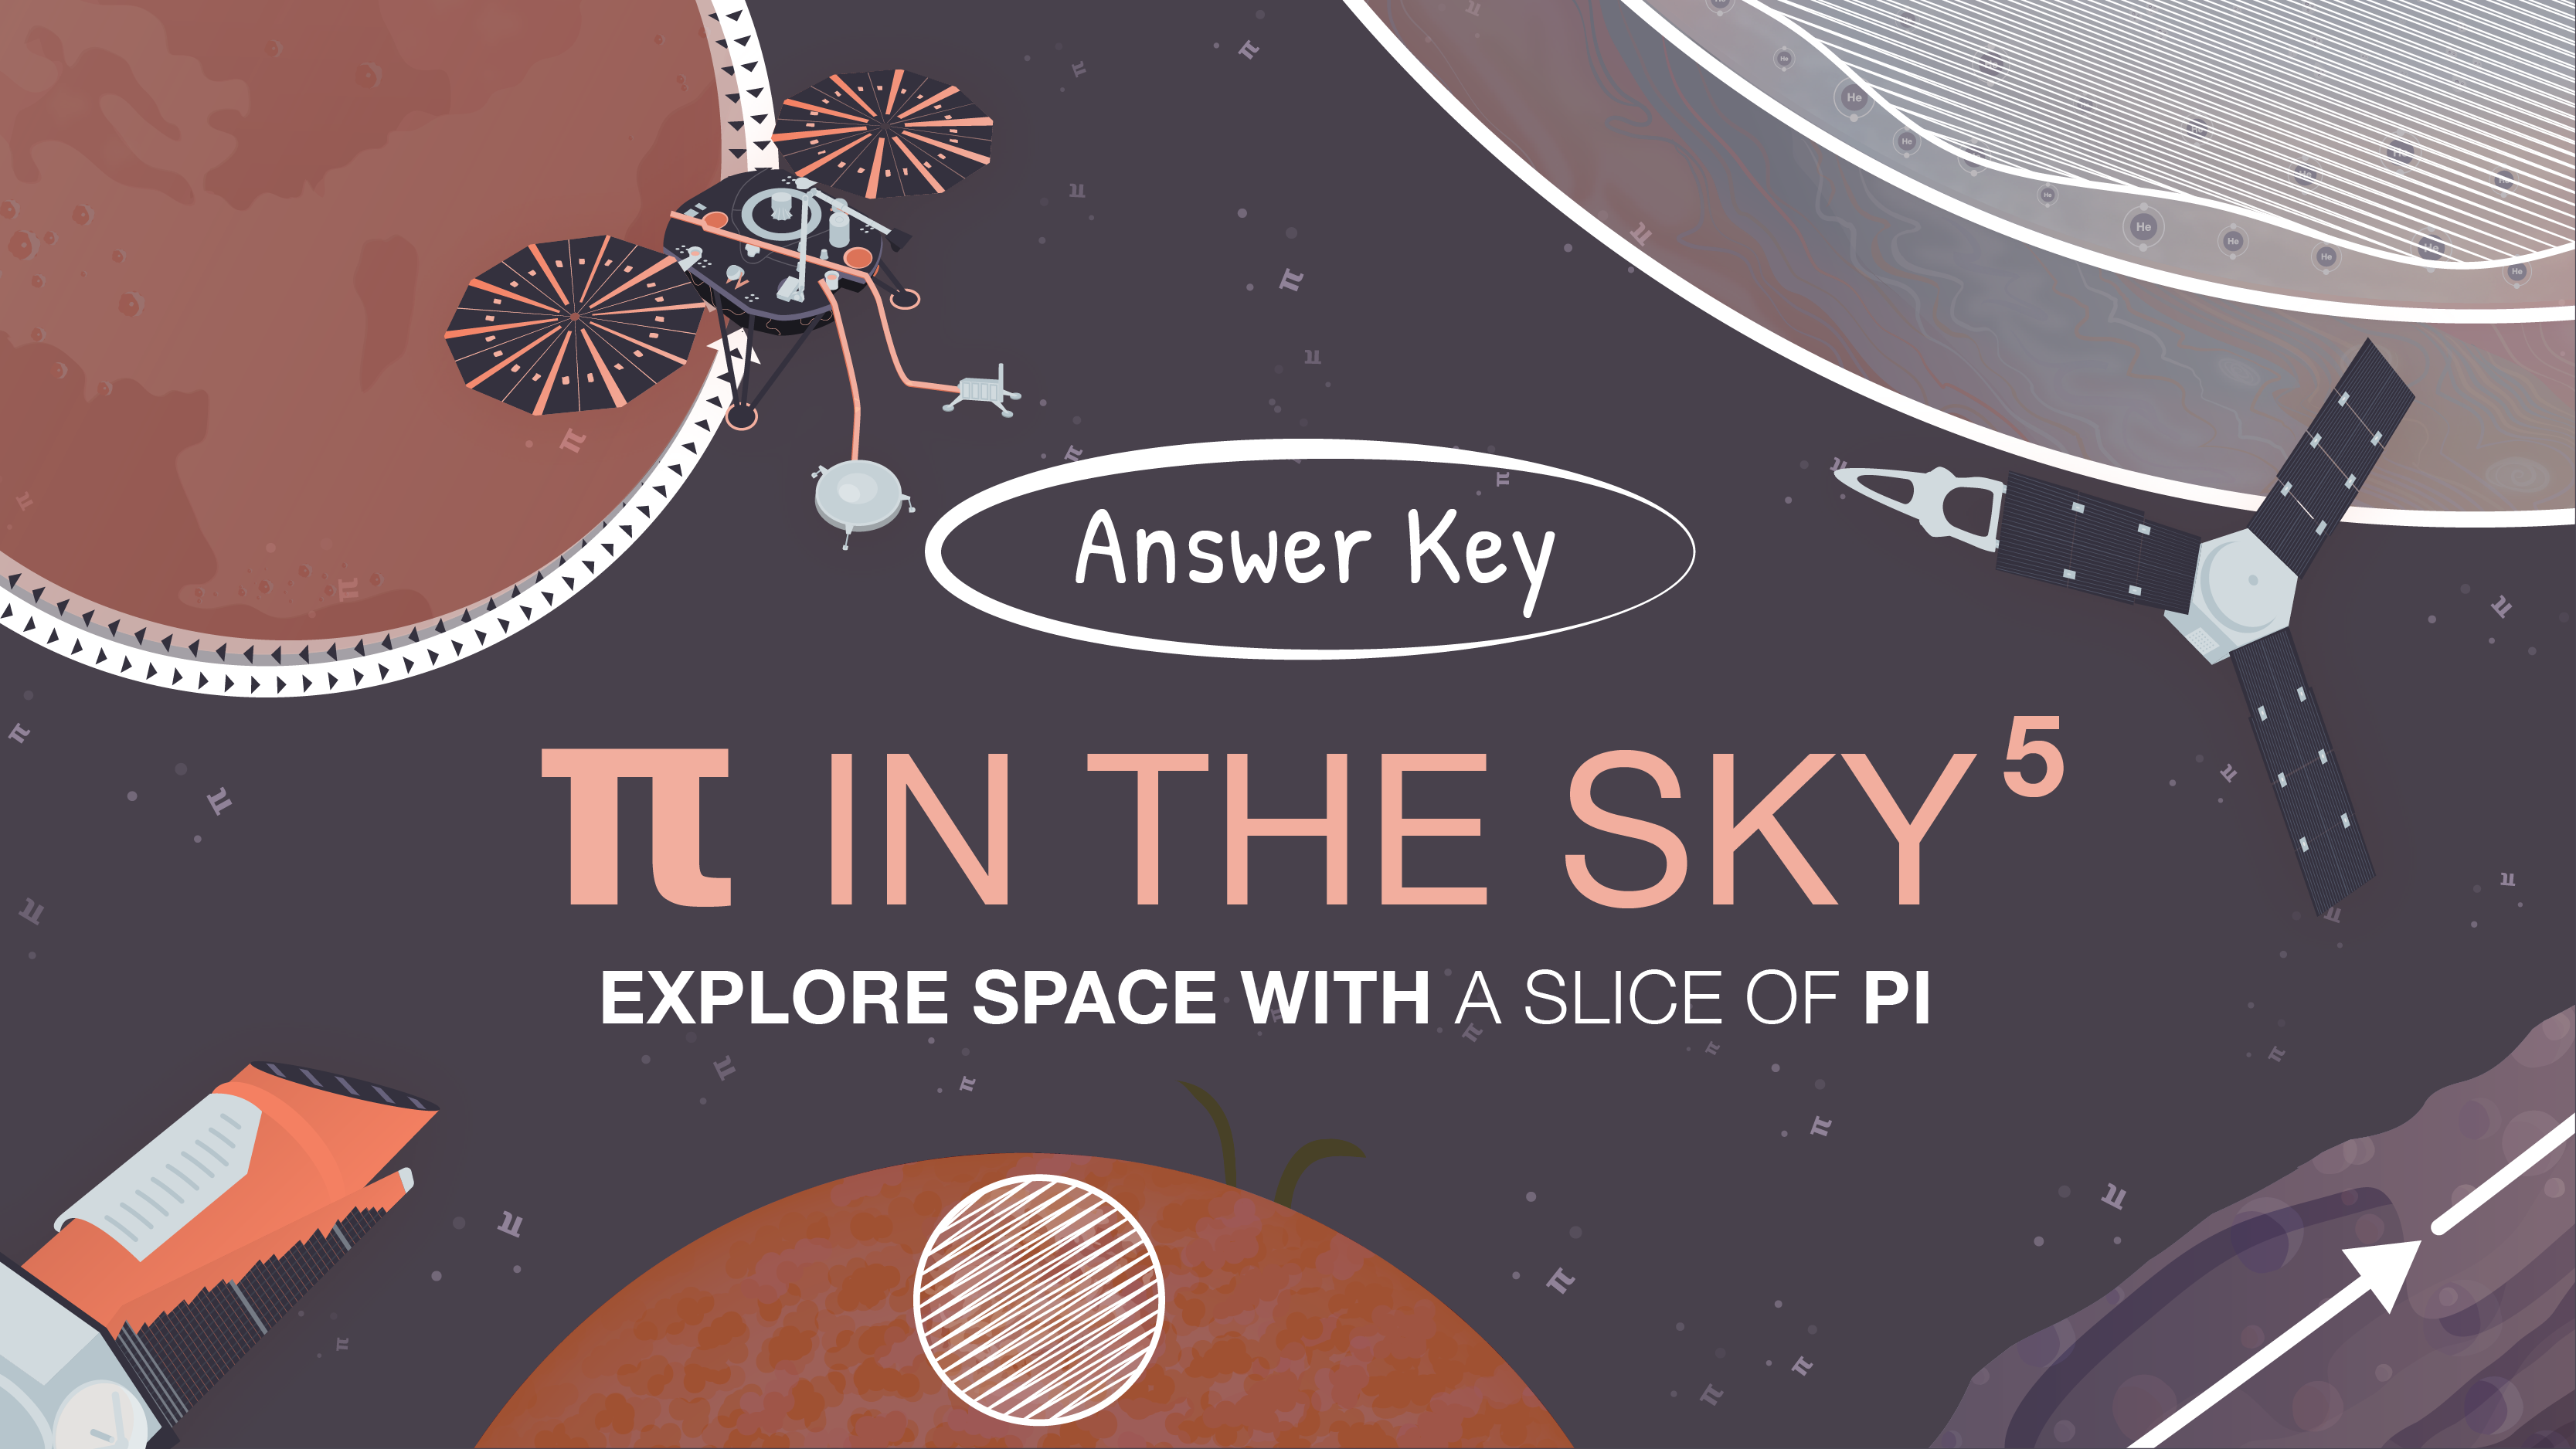 The Answers to the 2018 NASA Pi Day Challenge Are Here!